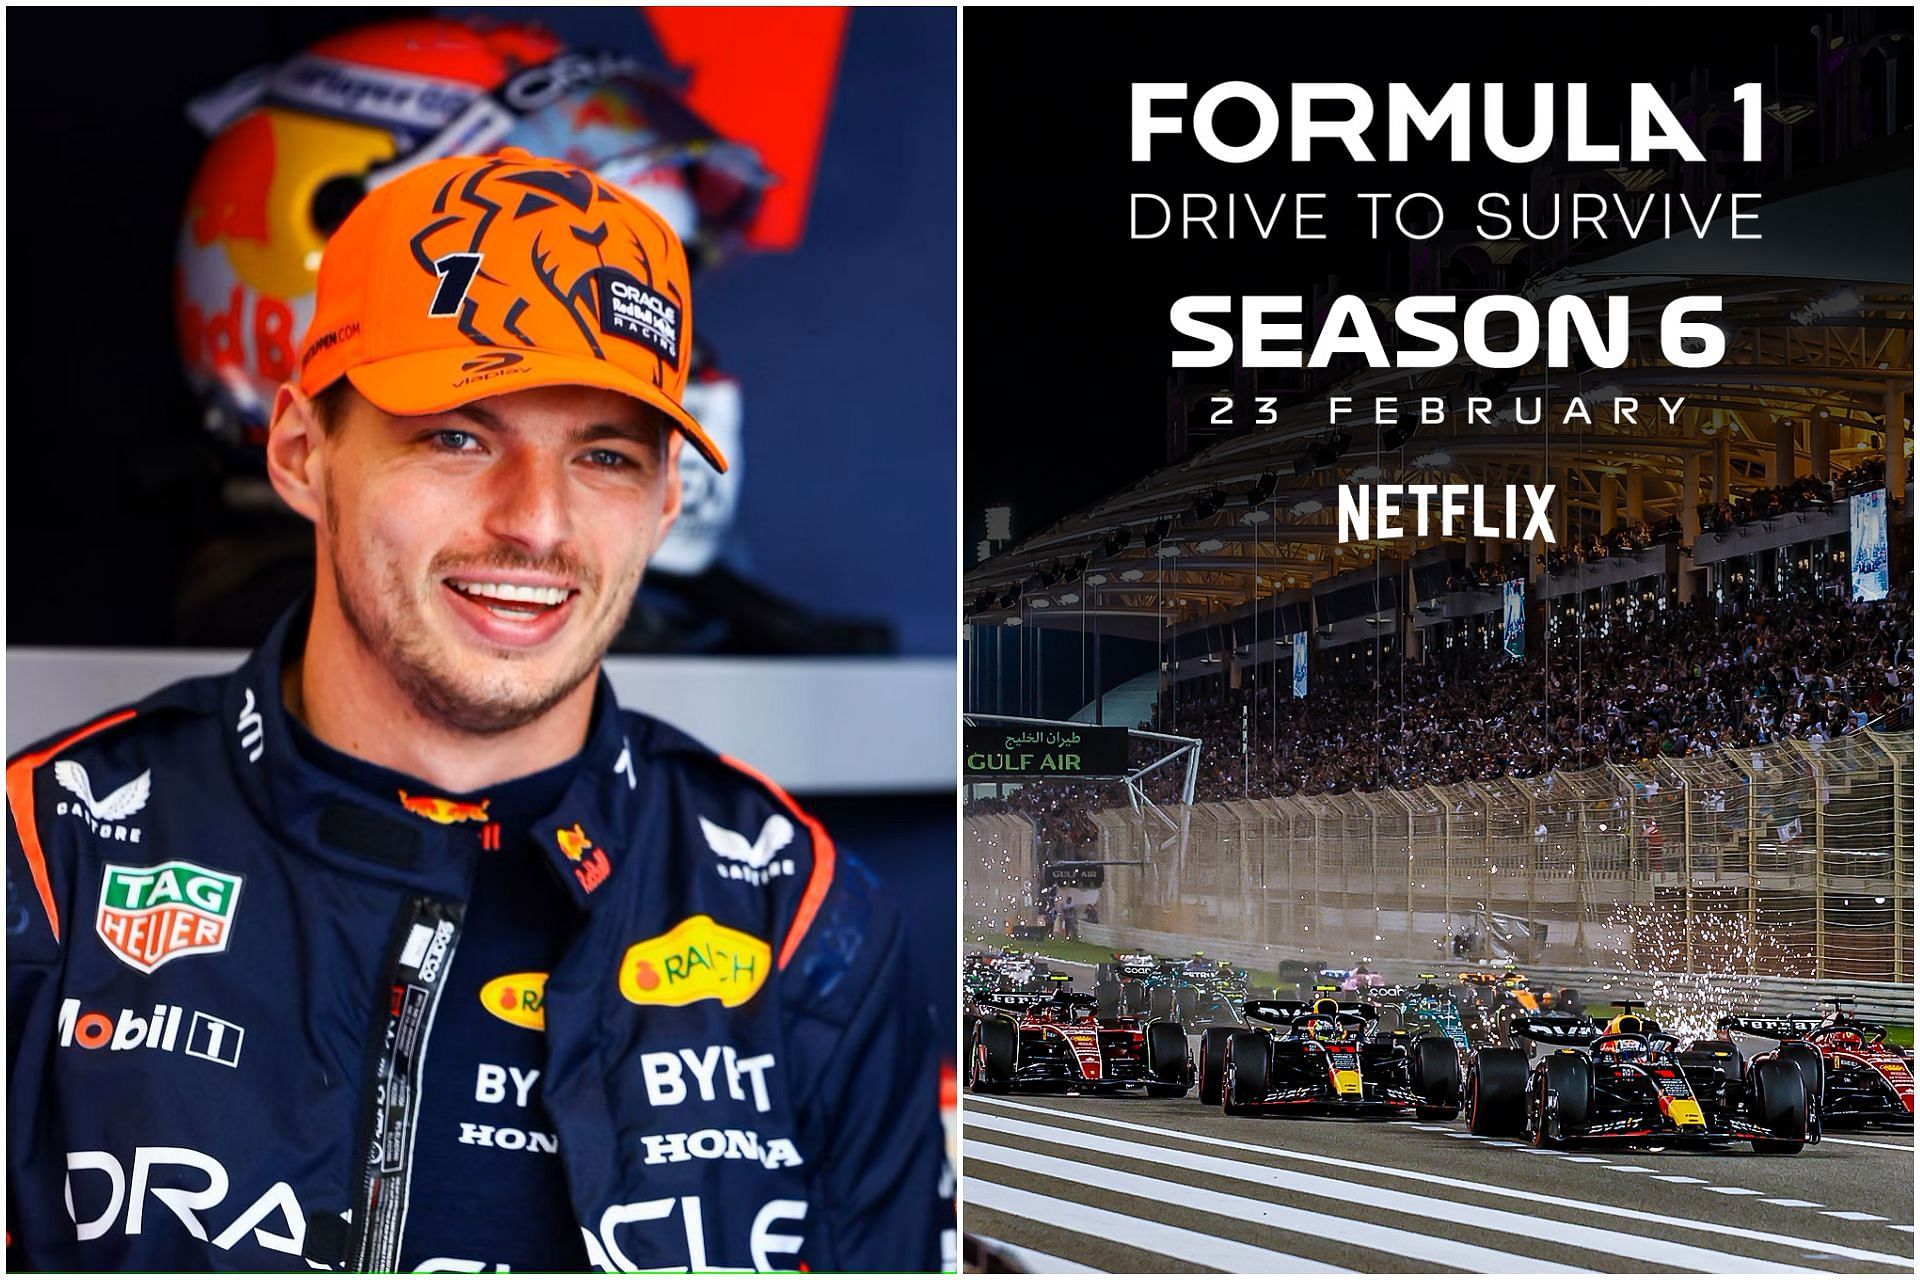 You don't imagine how excited I am for this Max Verstappen documentary:  Fans react to the release date of Netflix's Drive to Survive Season 6